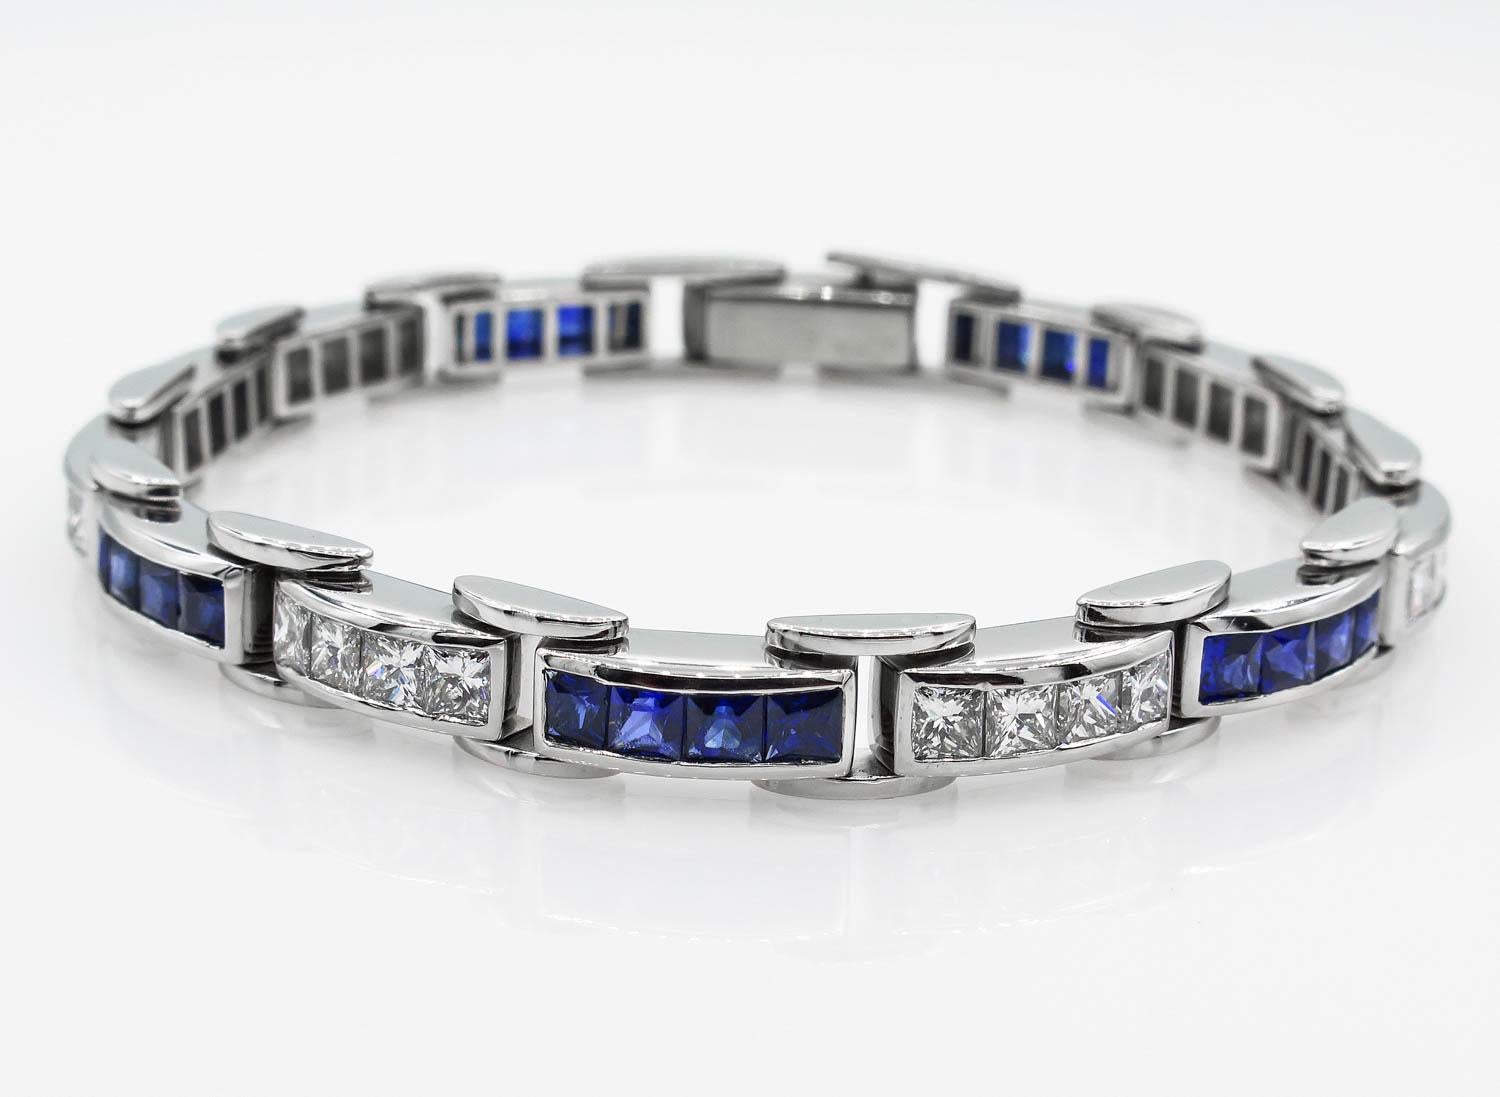 An Amazing Estate Handmade Platinum (stamped) Gemologic appraised Tennis Bracelet with Diamonds and Sapphires.
There are over 28 Princess cut Diamonds in F-G color, VS clarity over all; estimated total weight of the diamonds is 4.7ctw. The 28